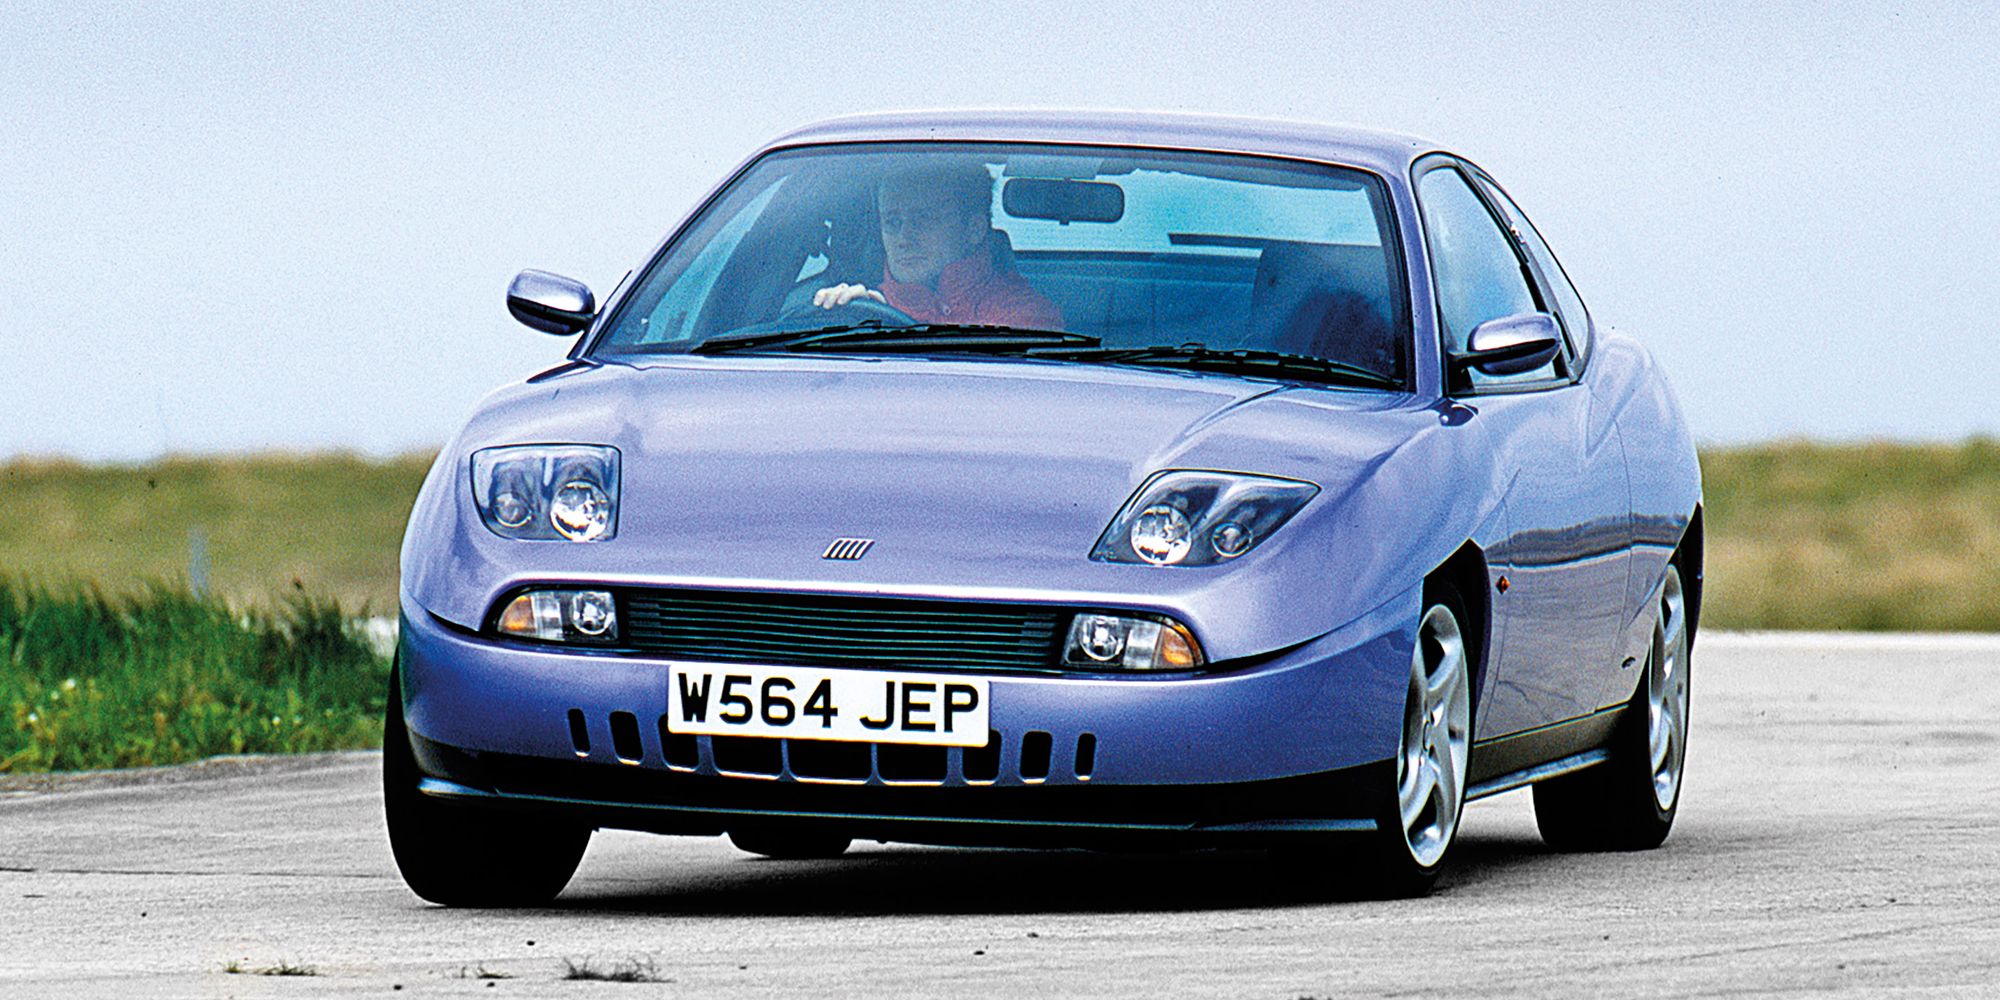 A Fiat Coupe cornering hard